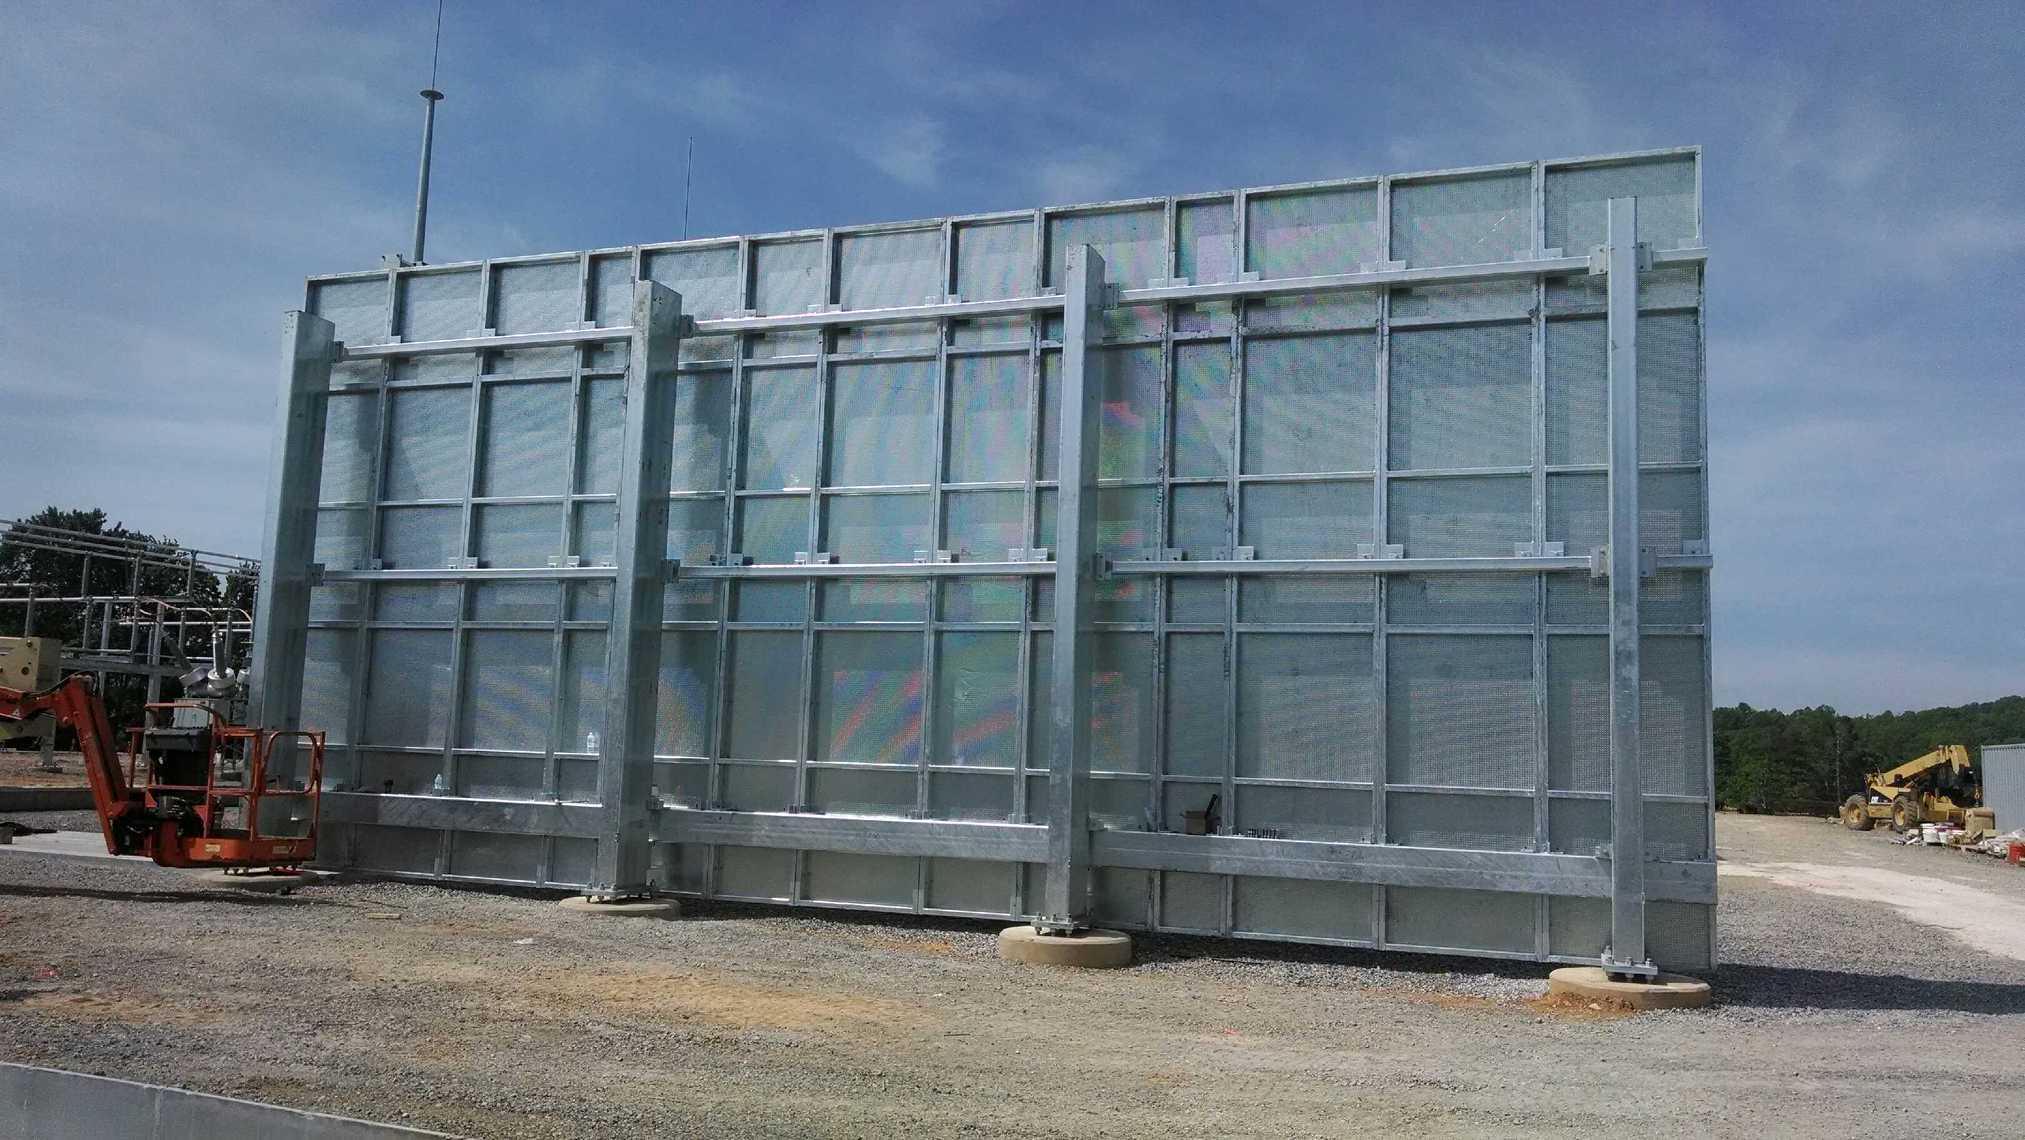 Steel and panel Ballistic Fire Barriers help with managing risks to transformers and critical equipment at minimial sizes and costs.